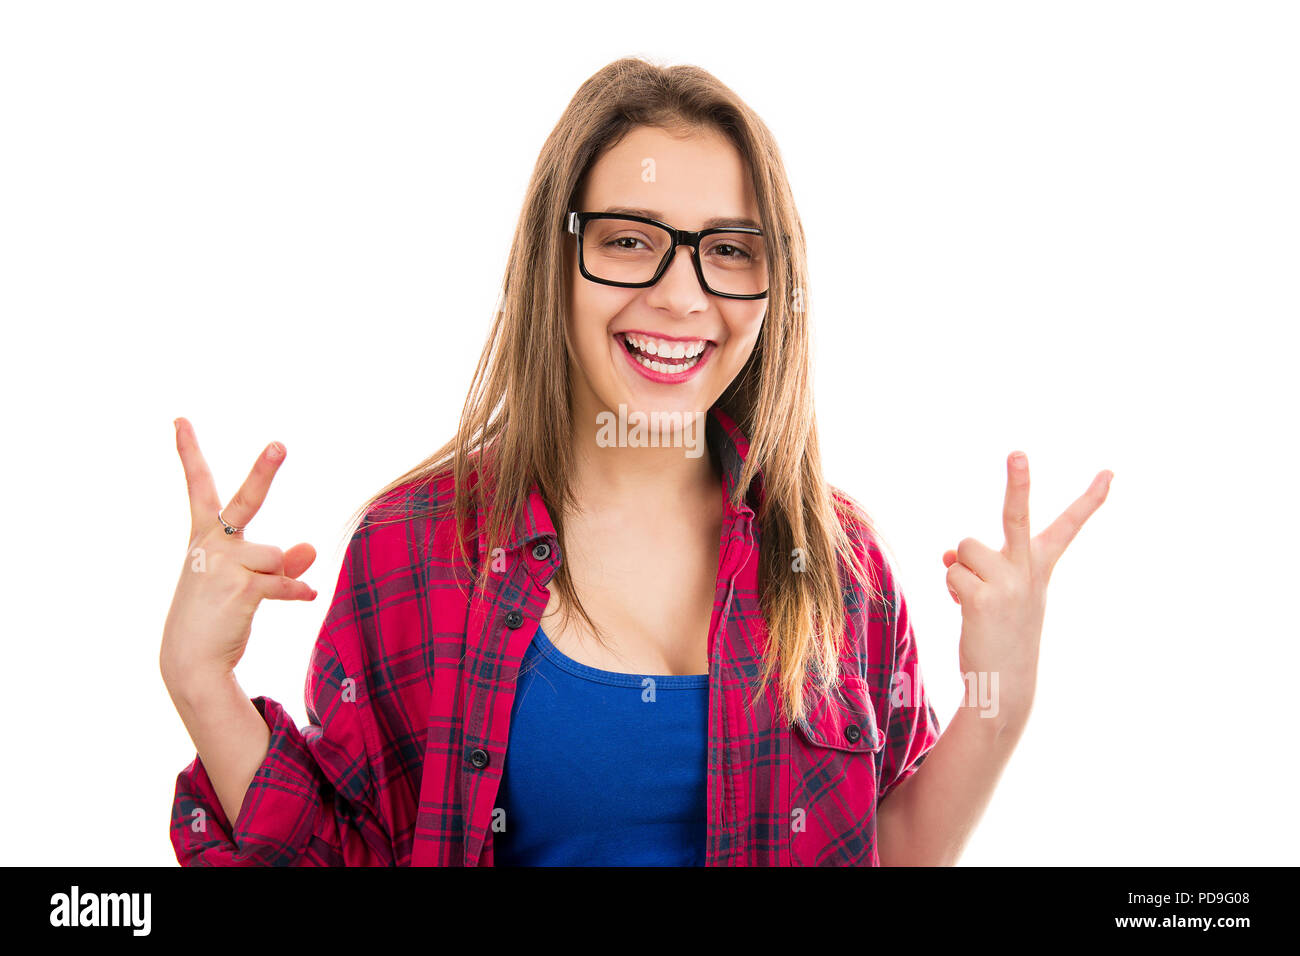 Young cute excited woman in glasses holding cool gesture sign celebrating victory on white background. Stock Photo